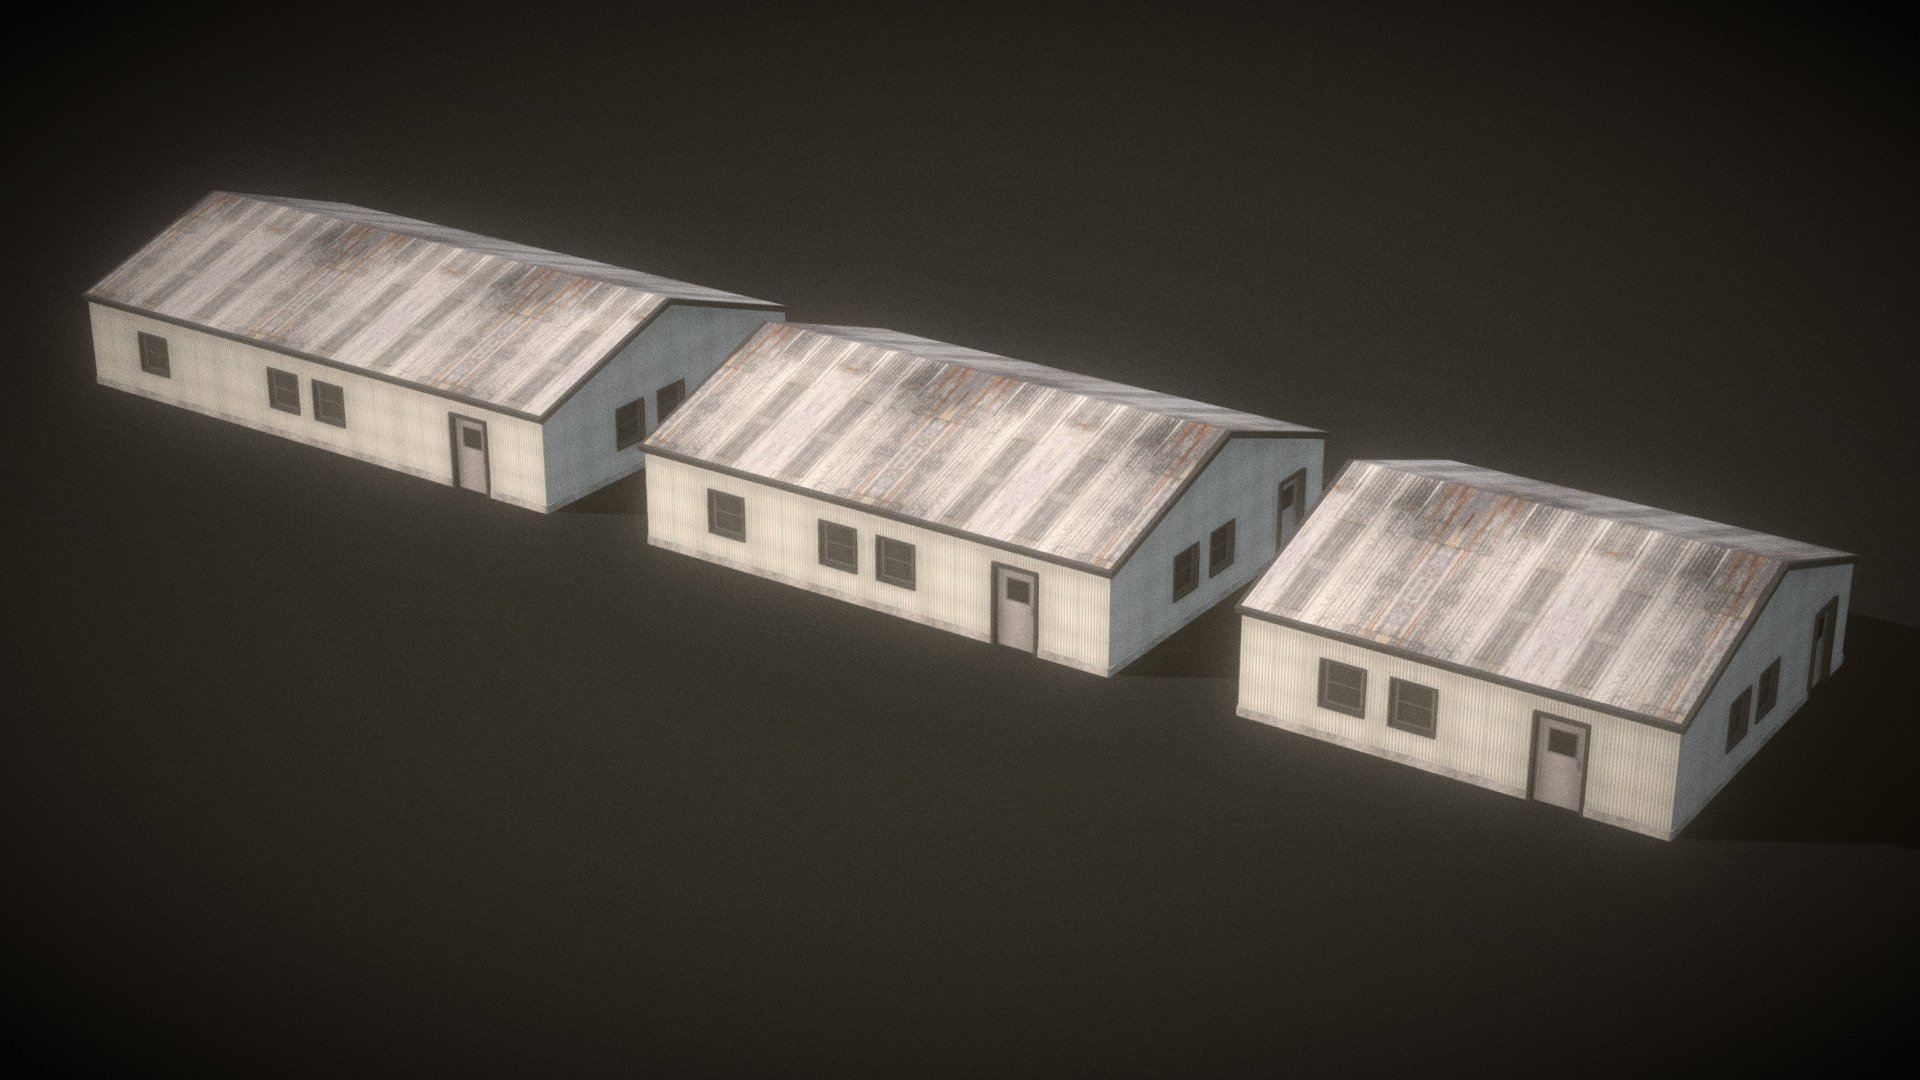 [ Last Update - 02 Feb 2022 ]

Pack of 3building

Format model .obj
Format texture .jpg

3 simple warehouse


Note -

This little pack it's a simple test for me, if I see any craze around this kind of model, i made a biggest pack with more
detail and more building 3d model